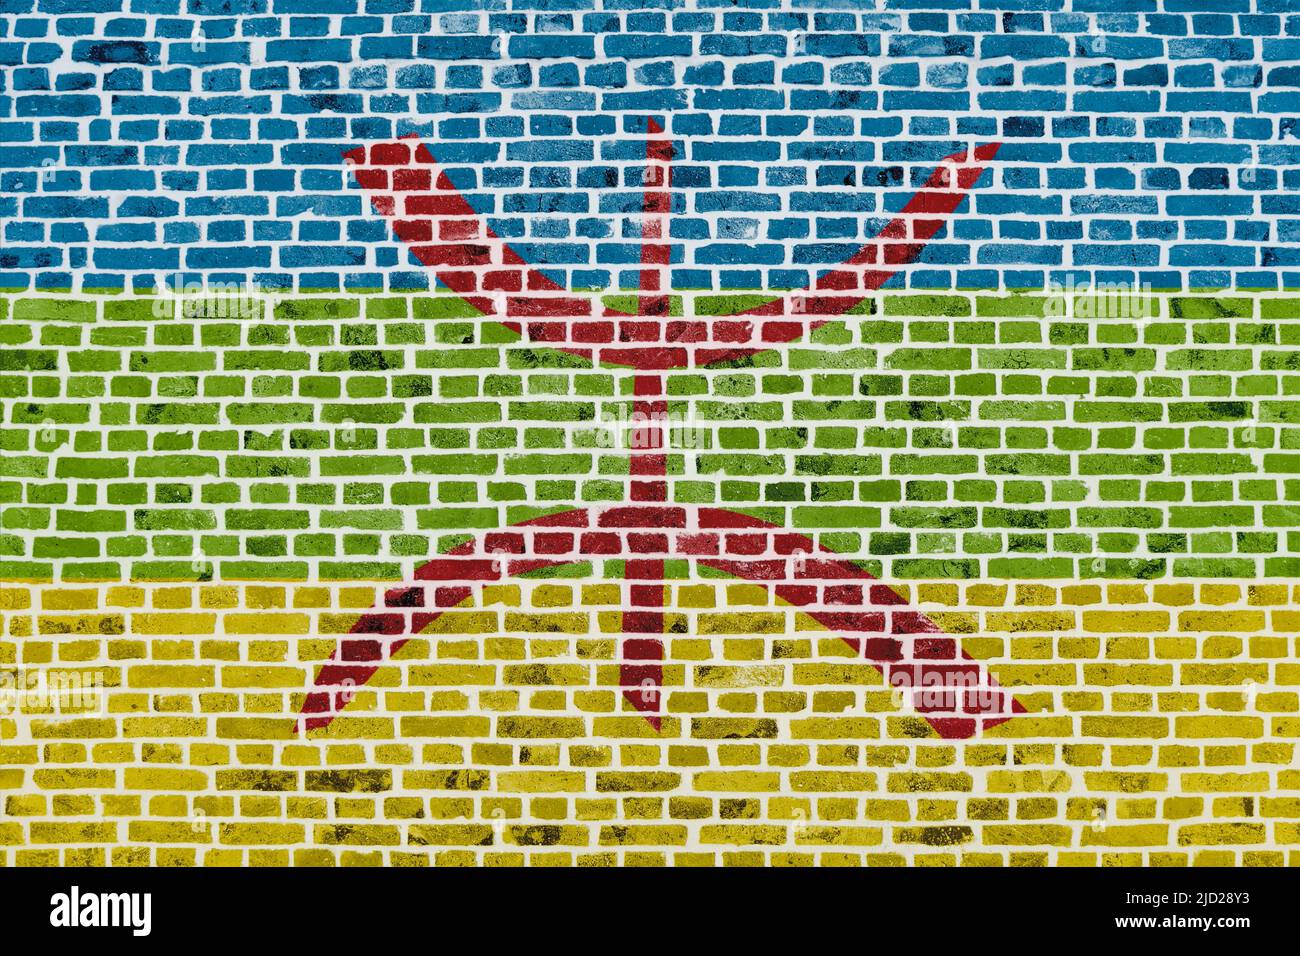 Close-up on a brick wall with the flag of Berber painted on it. Stock Photo